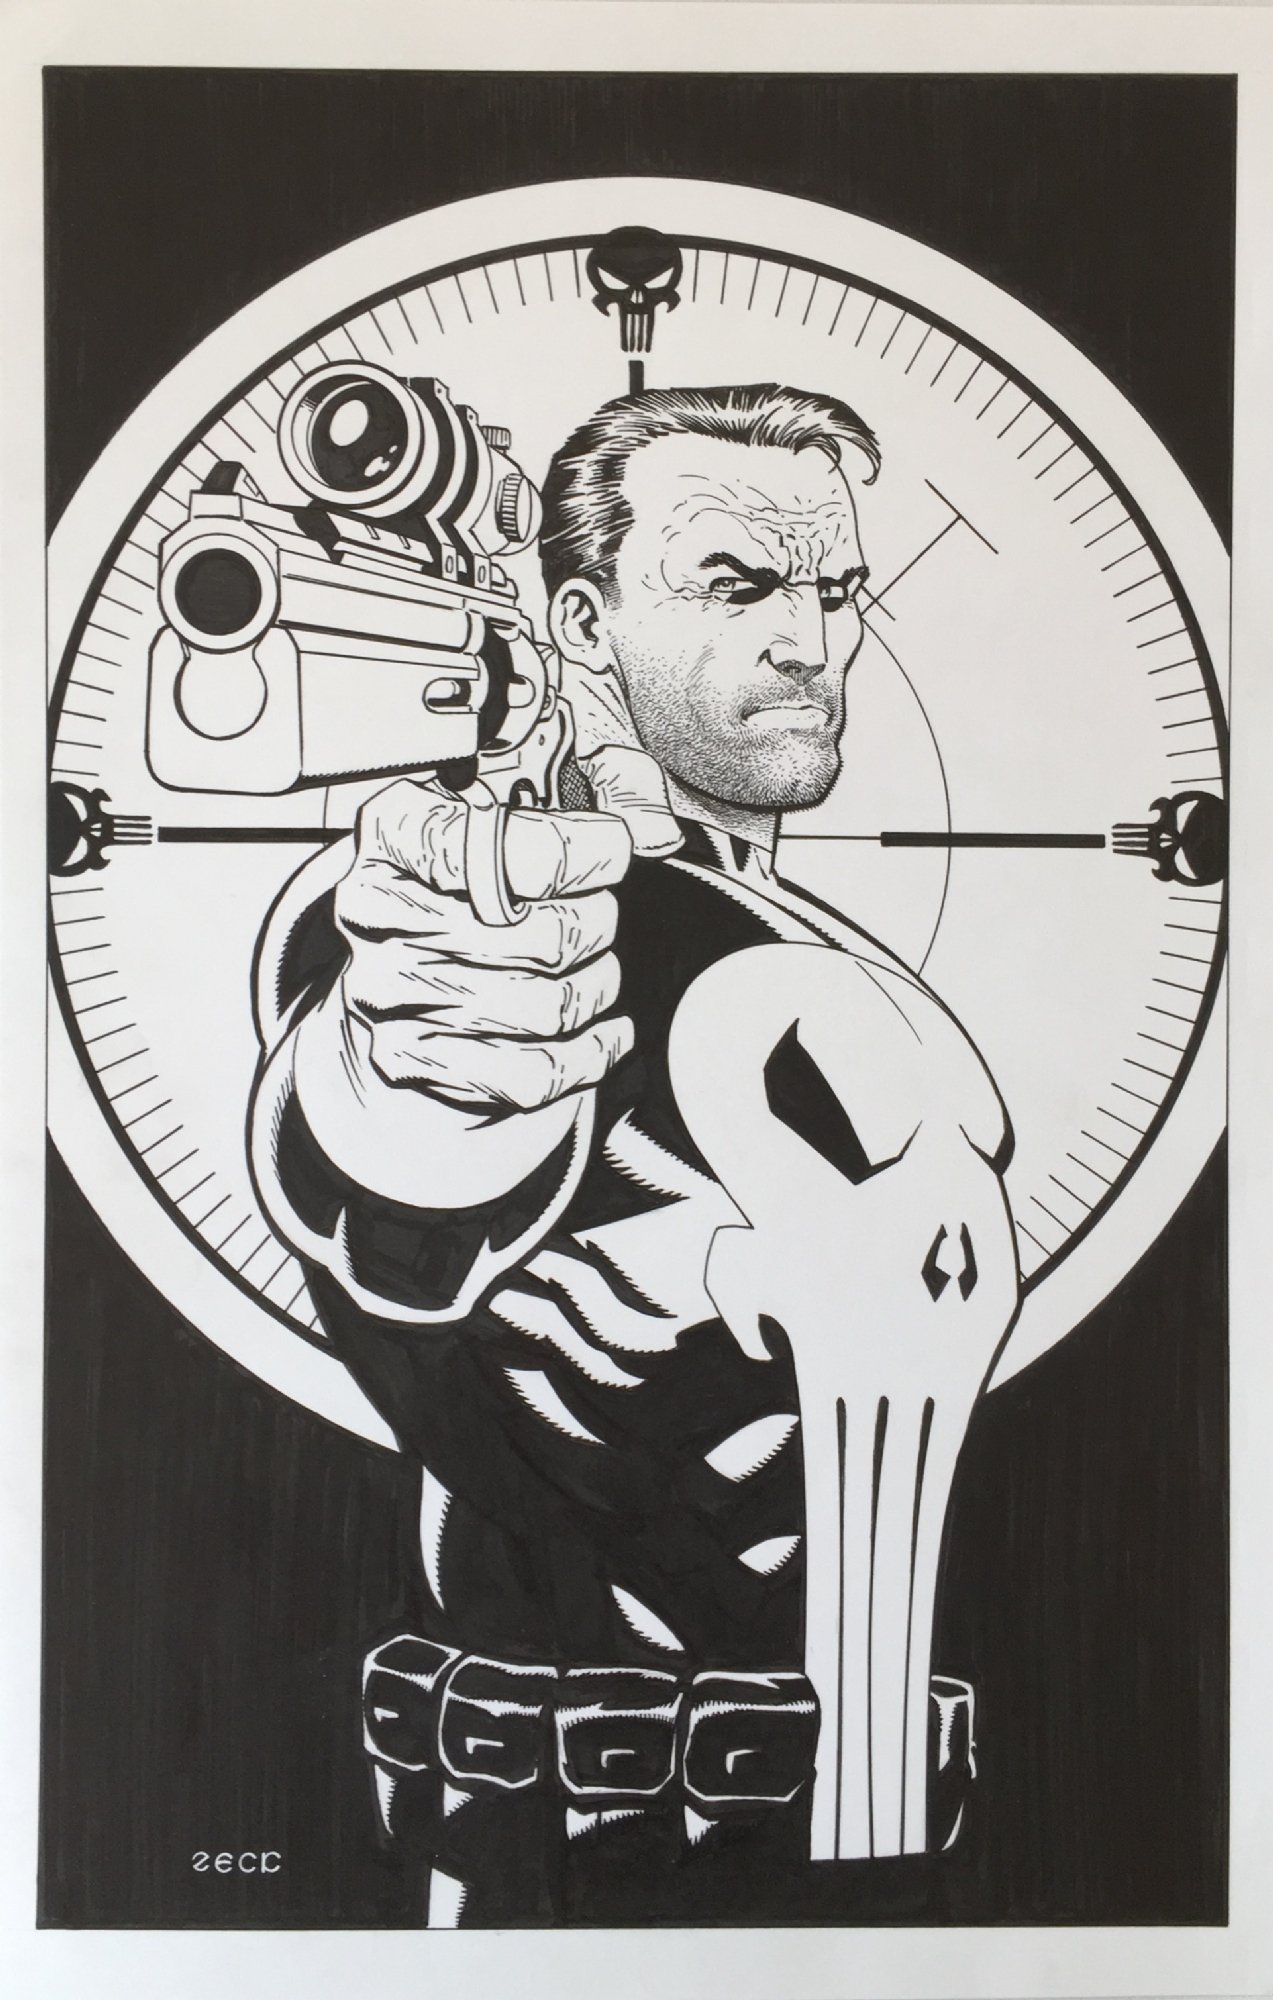 MIKE ZECK Punisher 2014 Big Wow Print & Punisher #2 Variant, in Charles  Costas's PERSONAL COLLECTION - My Punisher Grails!!! Comic Art Gallery Room